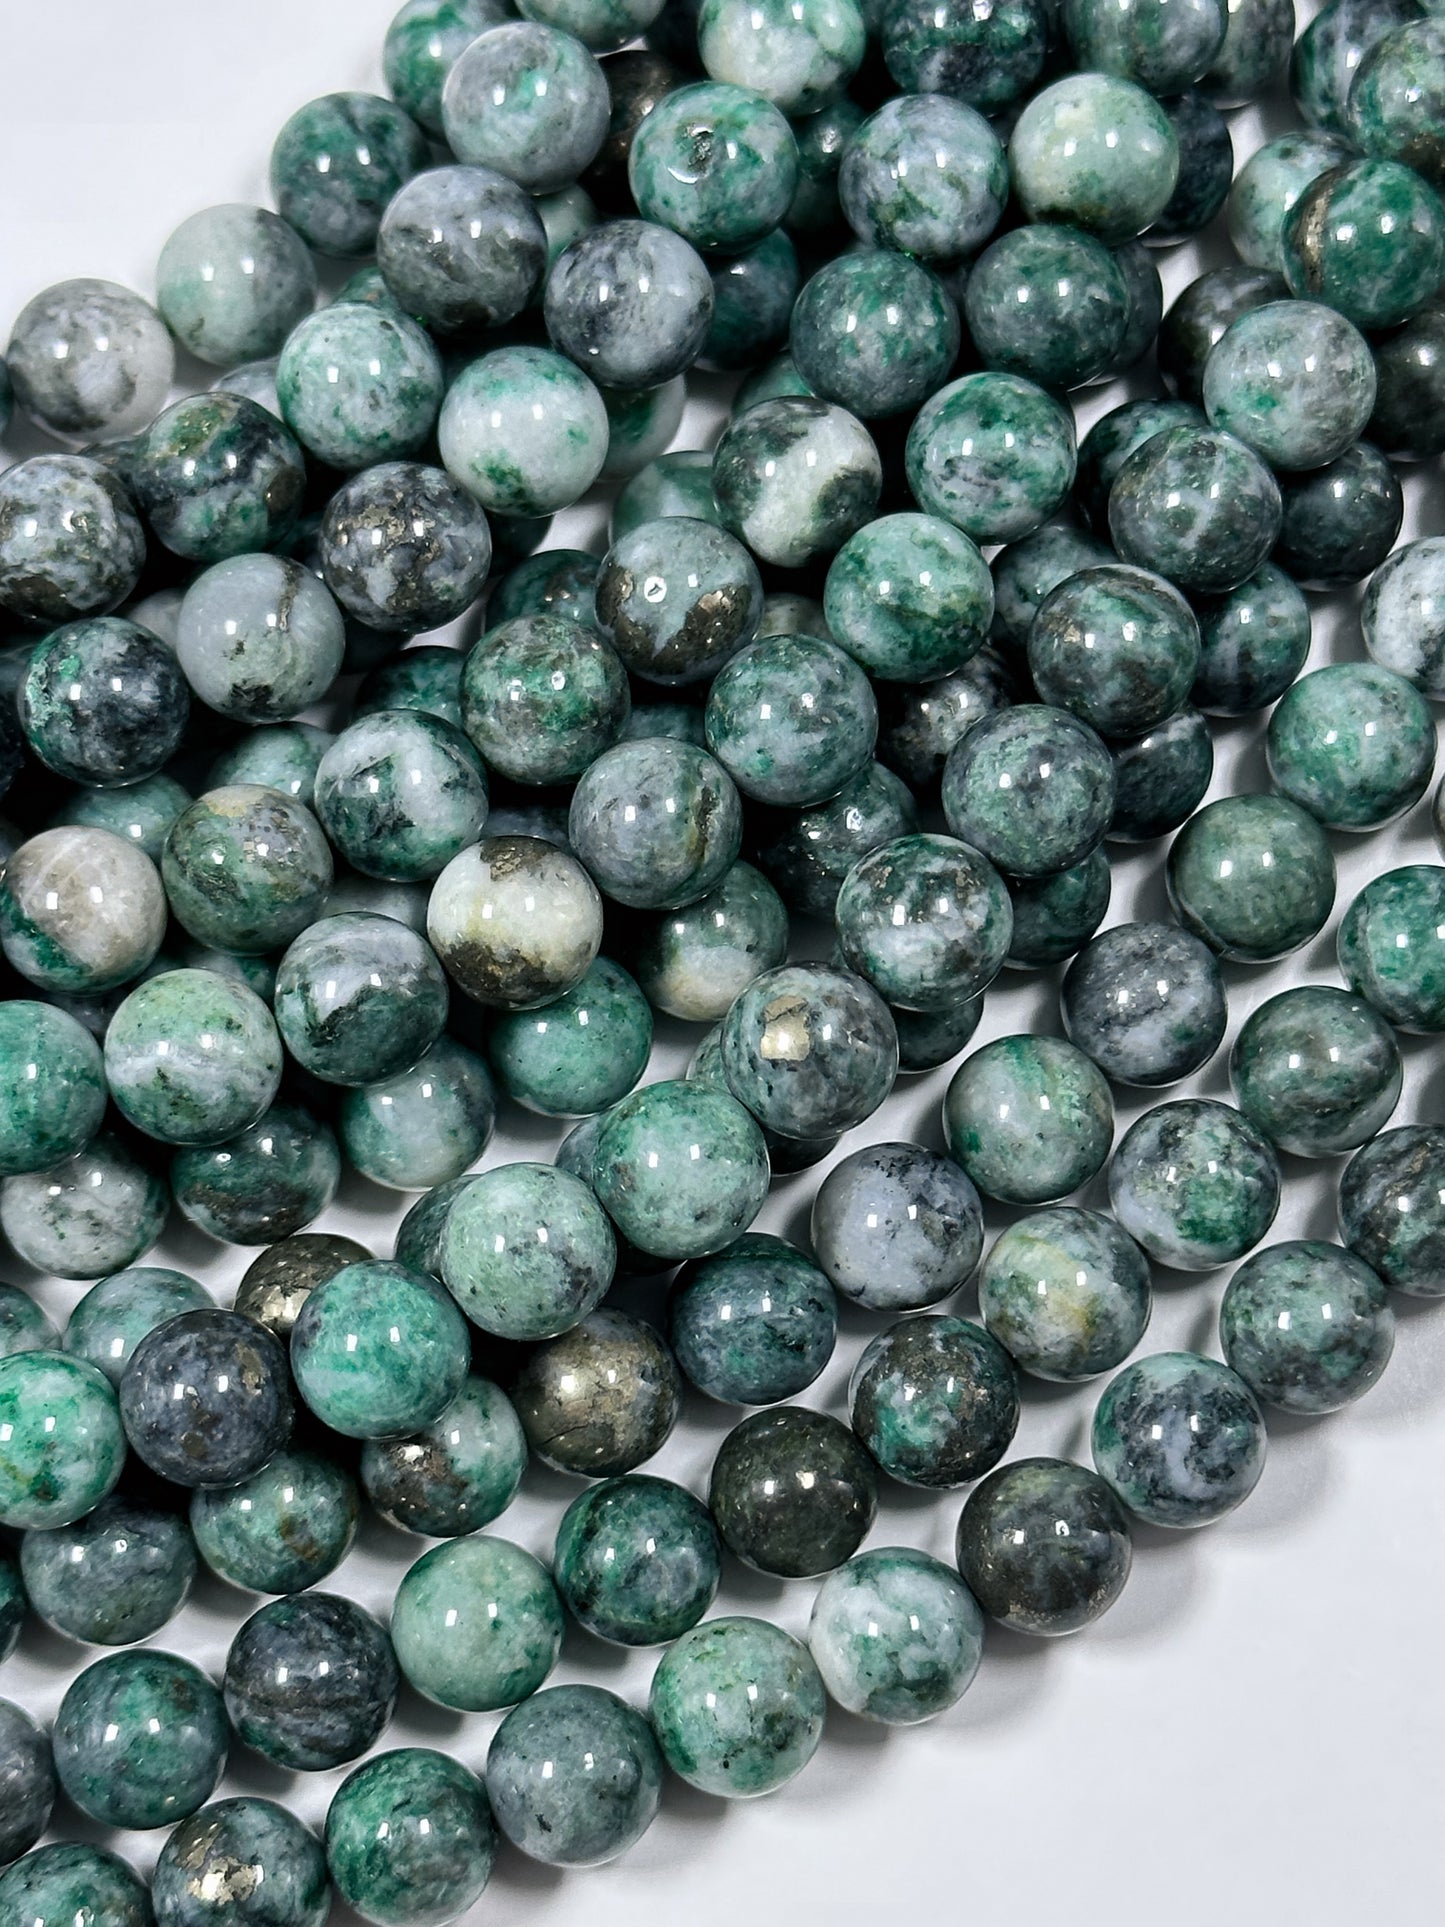 NATURAL Pyrite in Green Jade Gemstone Bead 6mm 8mm 10mm Round Beads. Gorgeous Green Color Copper Ore Gemstone Loose Beads Full Strand 15.5"